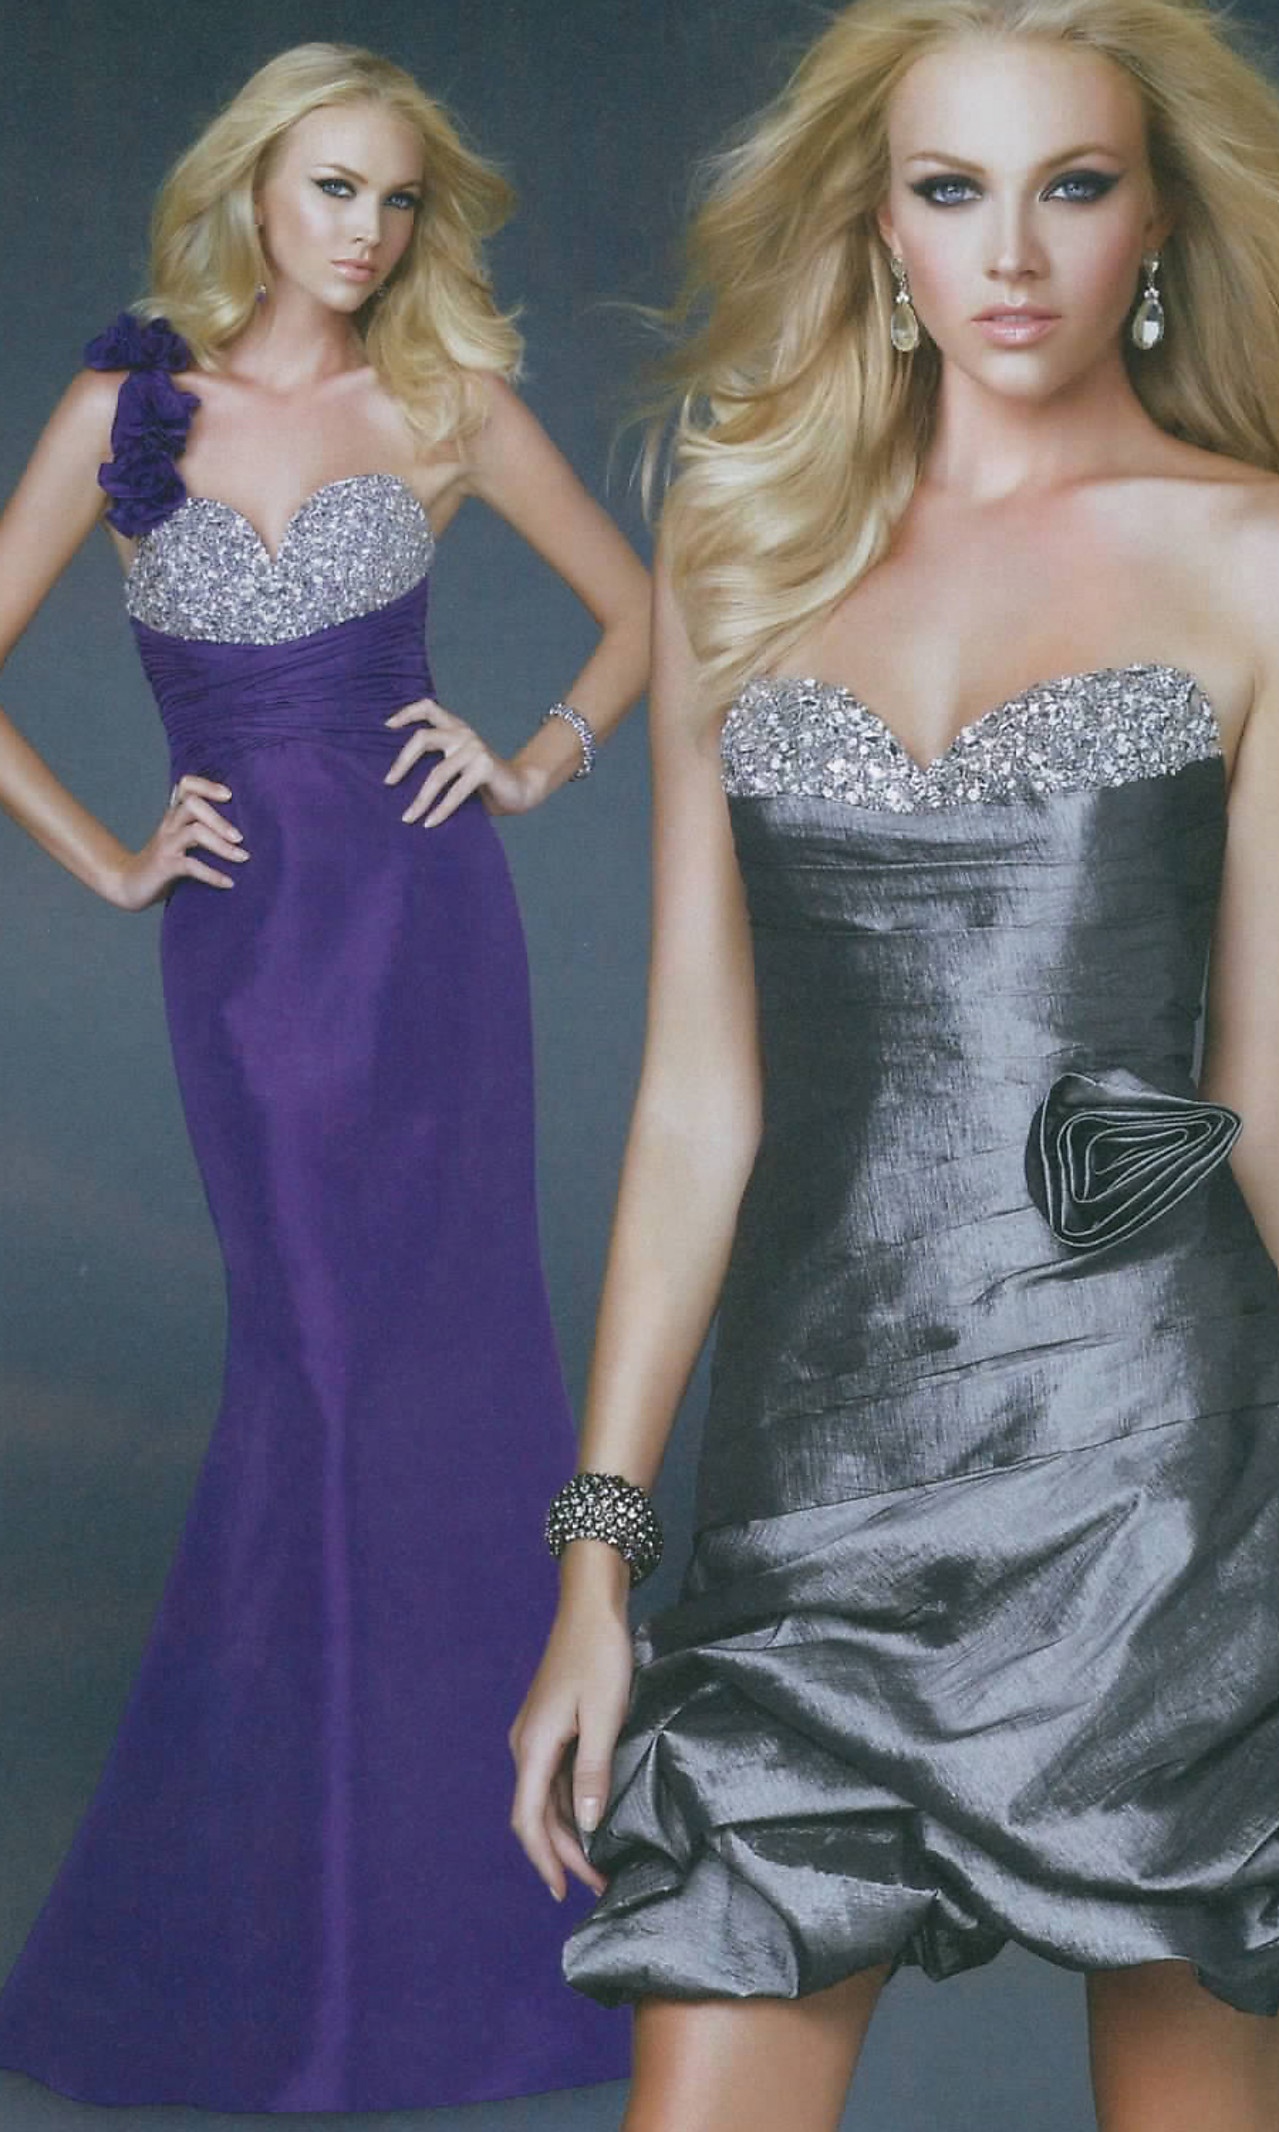 One-Shoulder Floor Length Sheath Purple Silky Taffeta Prom Dress of Sequined Bust and Flower Strap